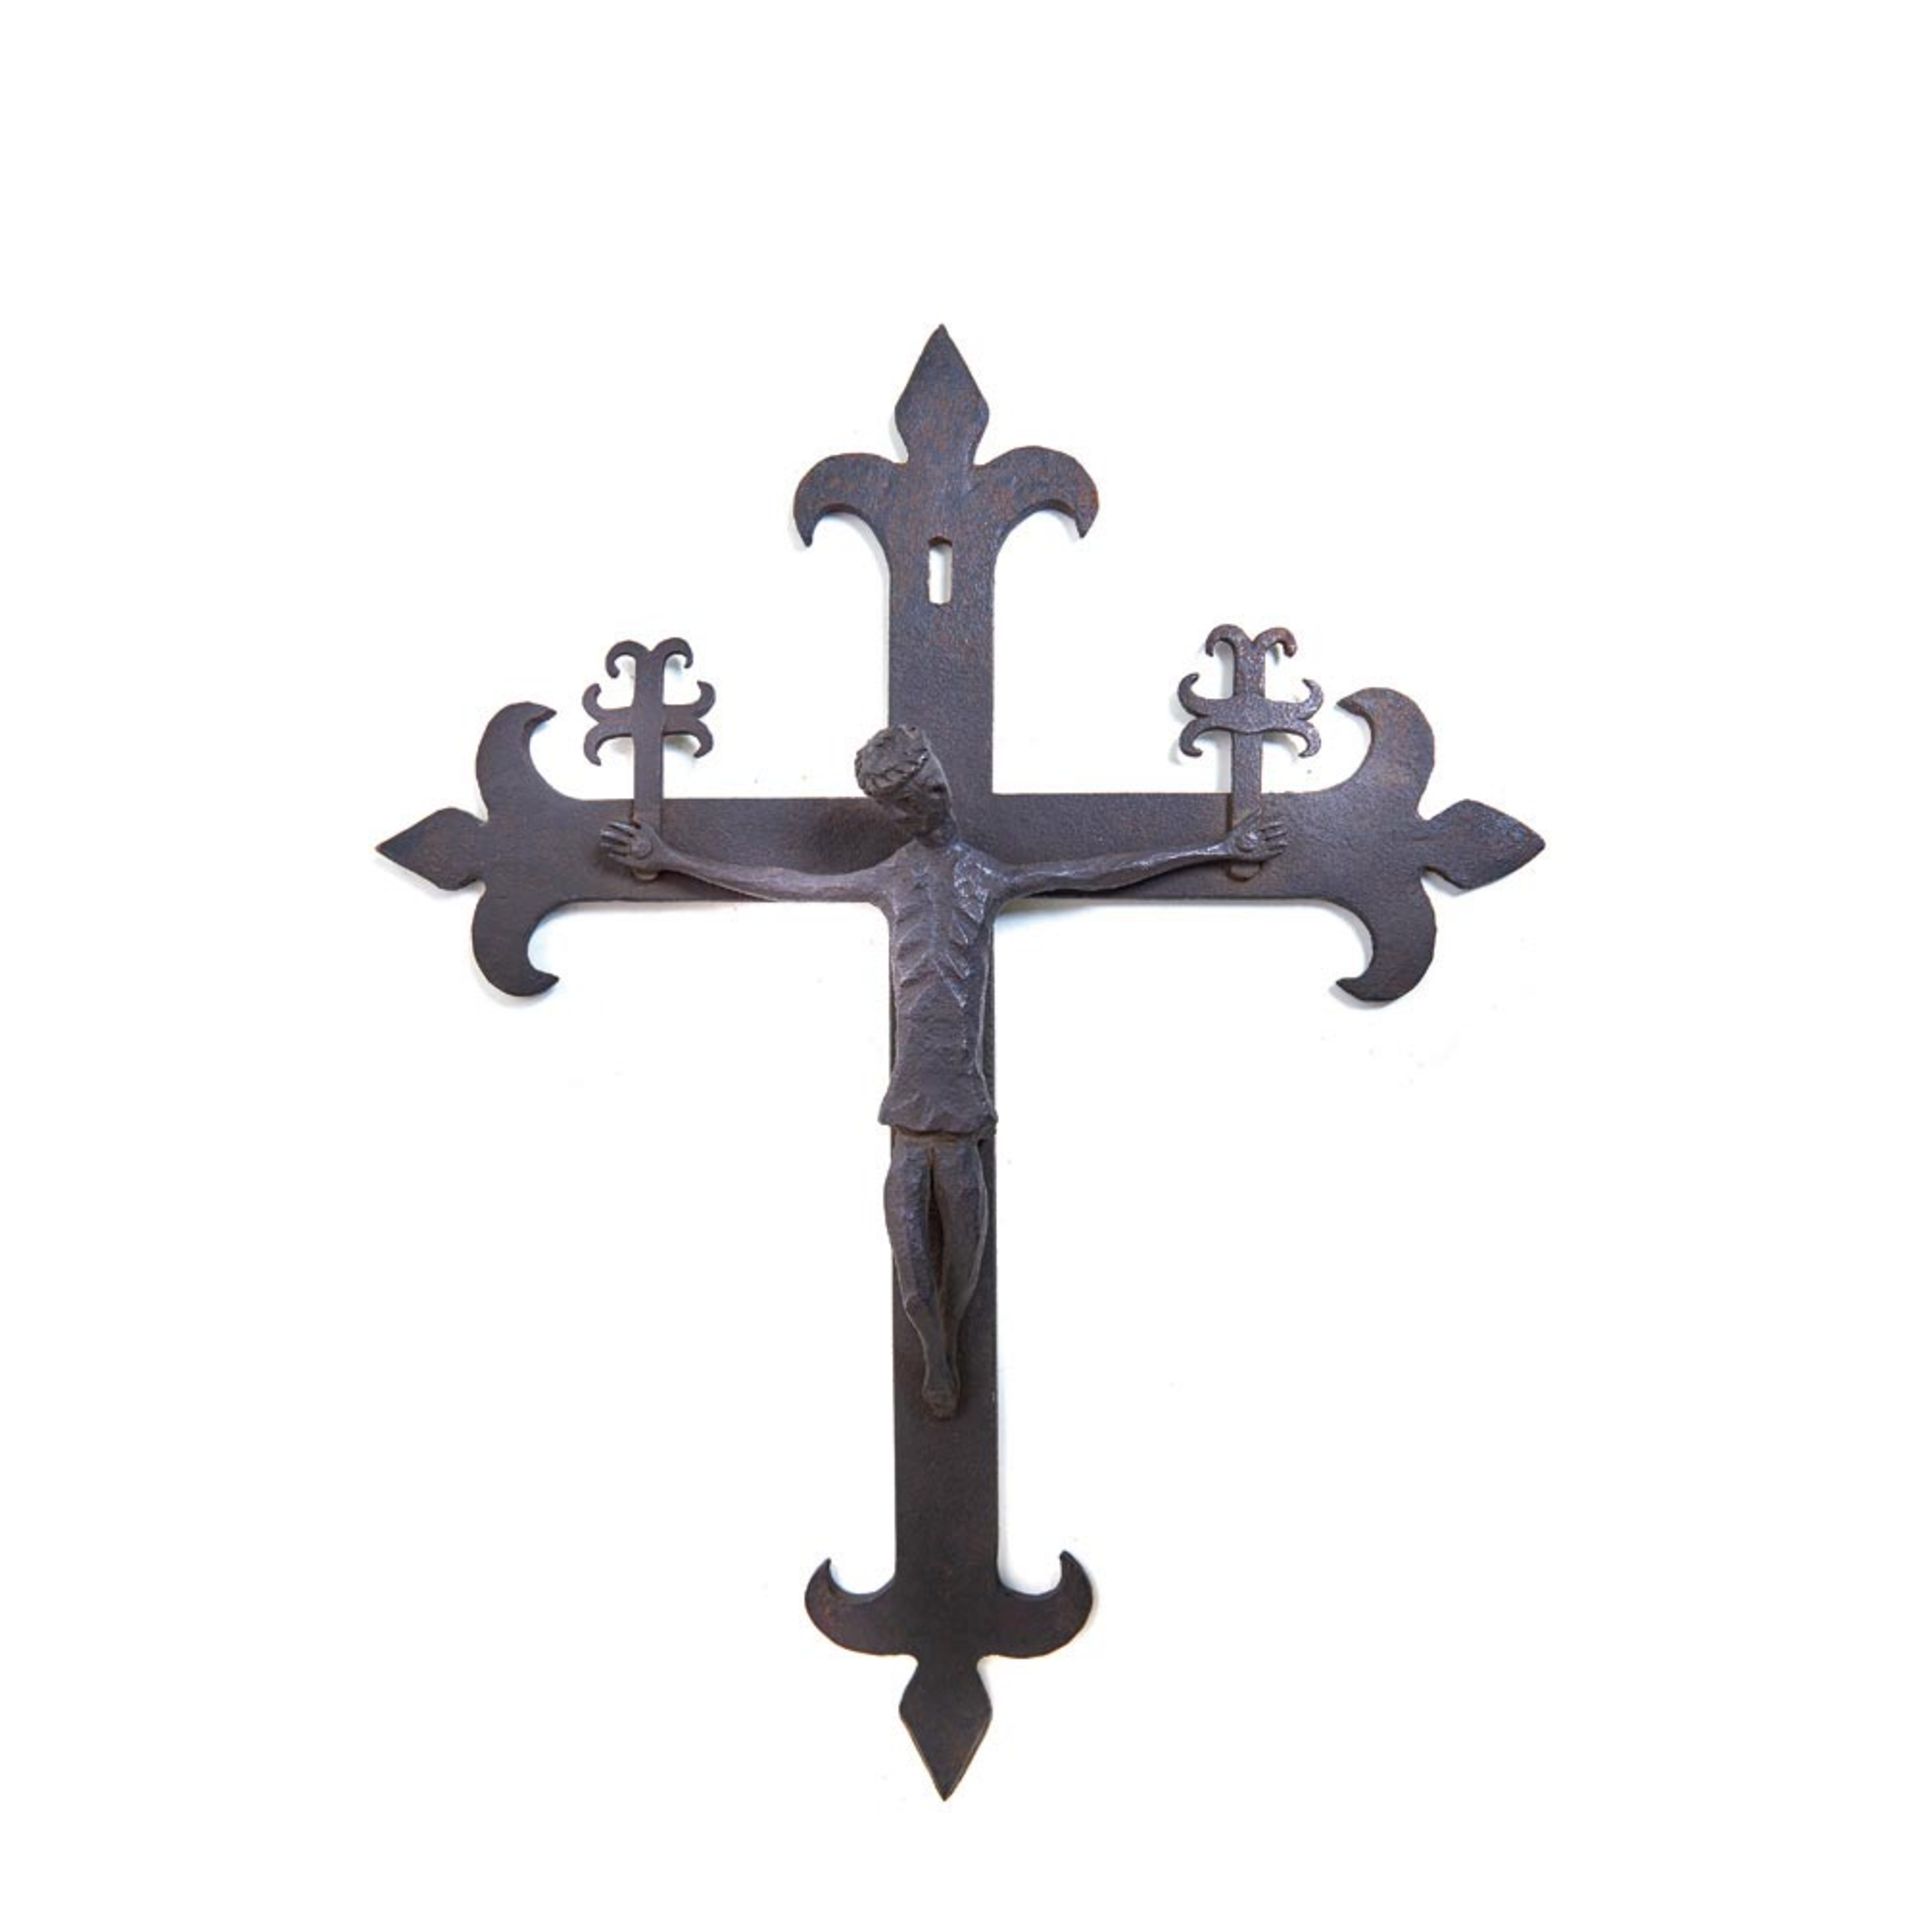 Wrought iron crucifix, early 20th century